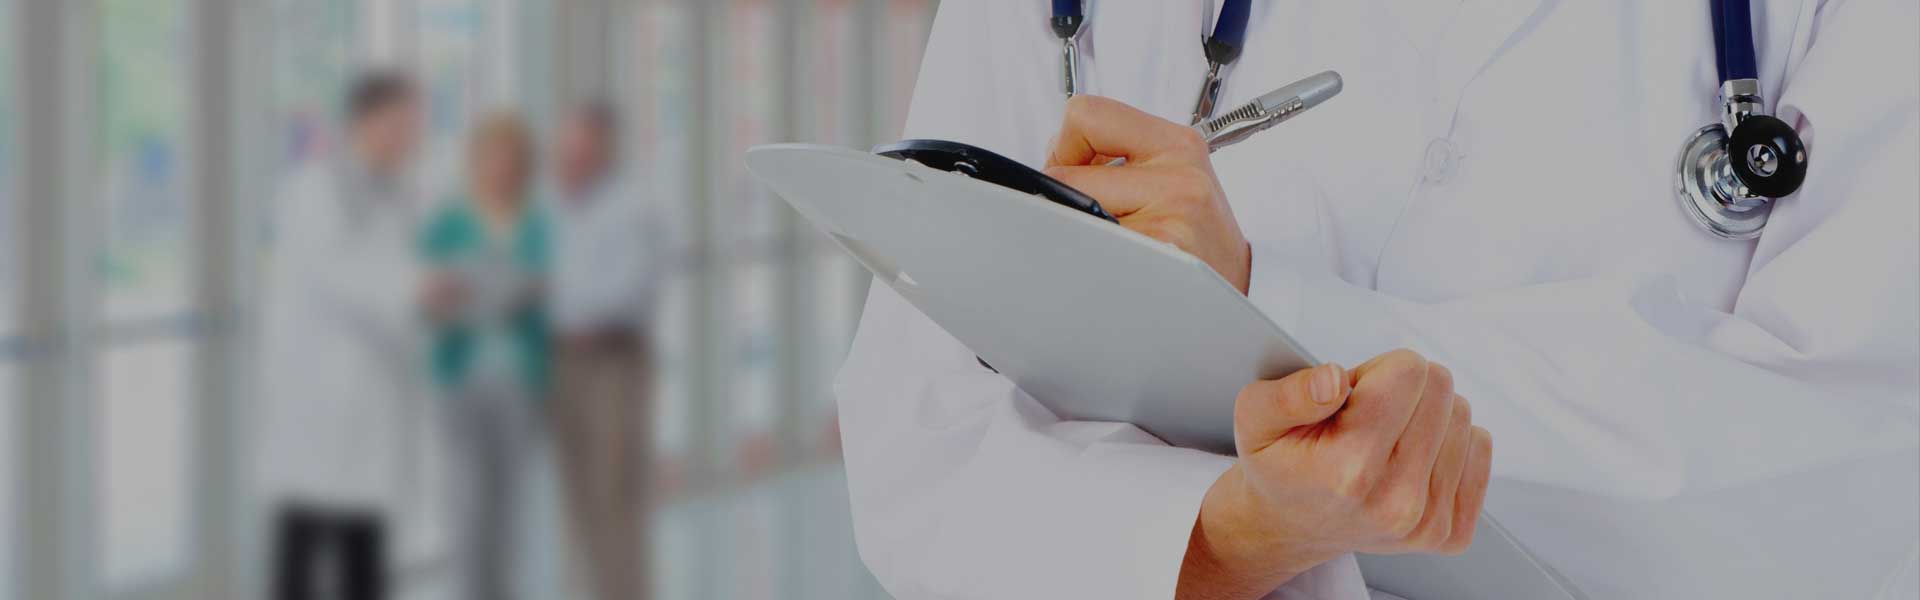 Medical doctor holding clipboard in right hand while writing notes with left hand